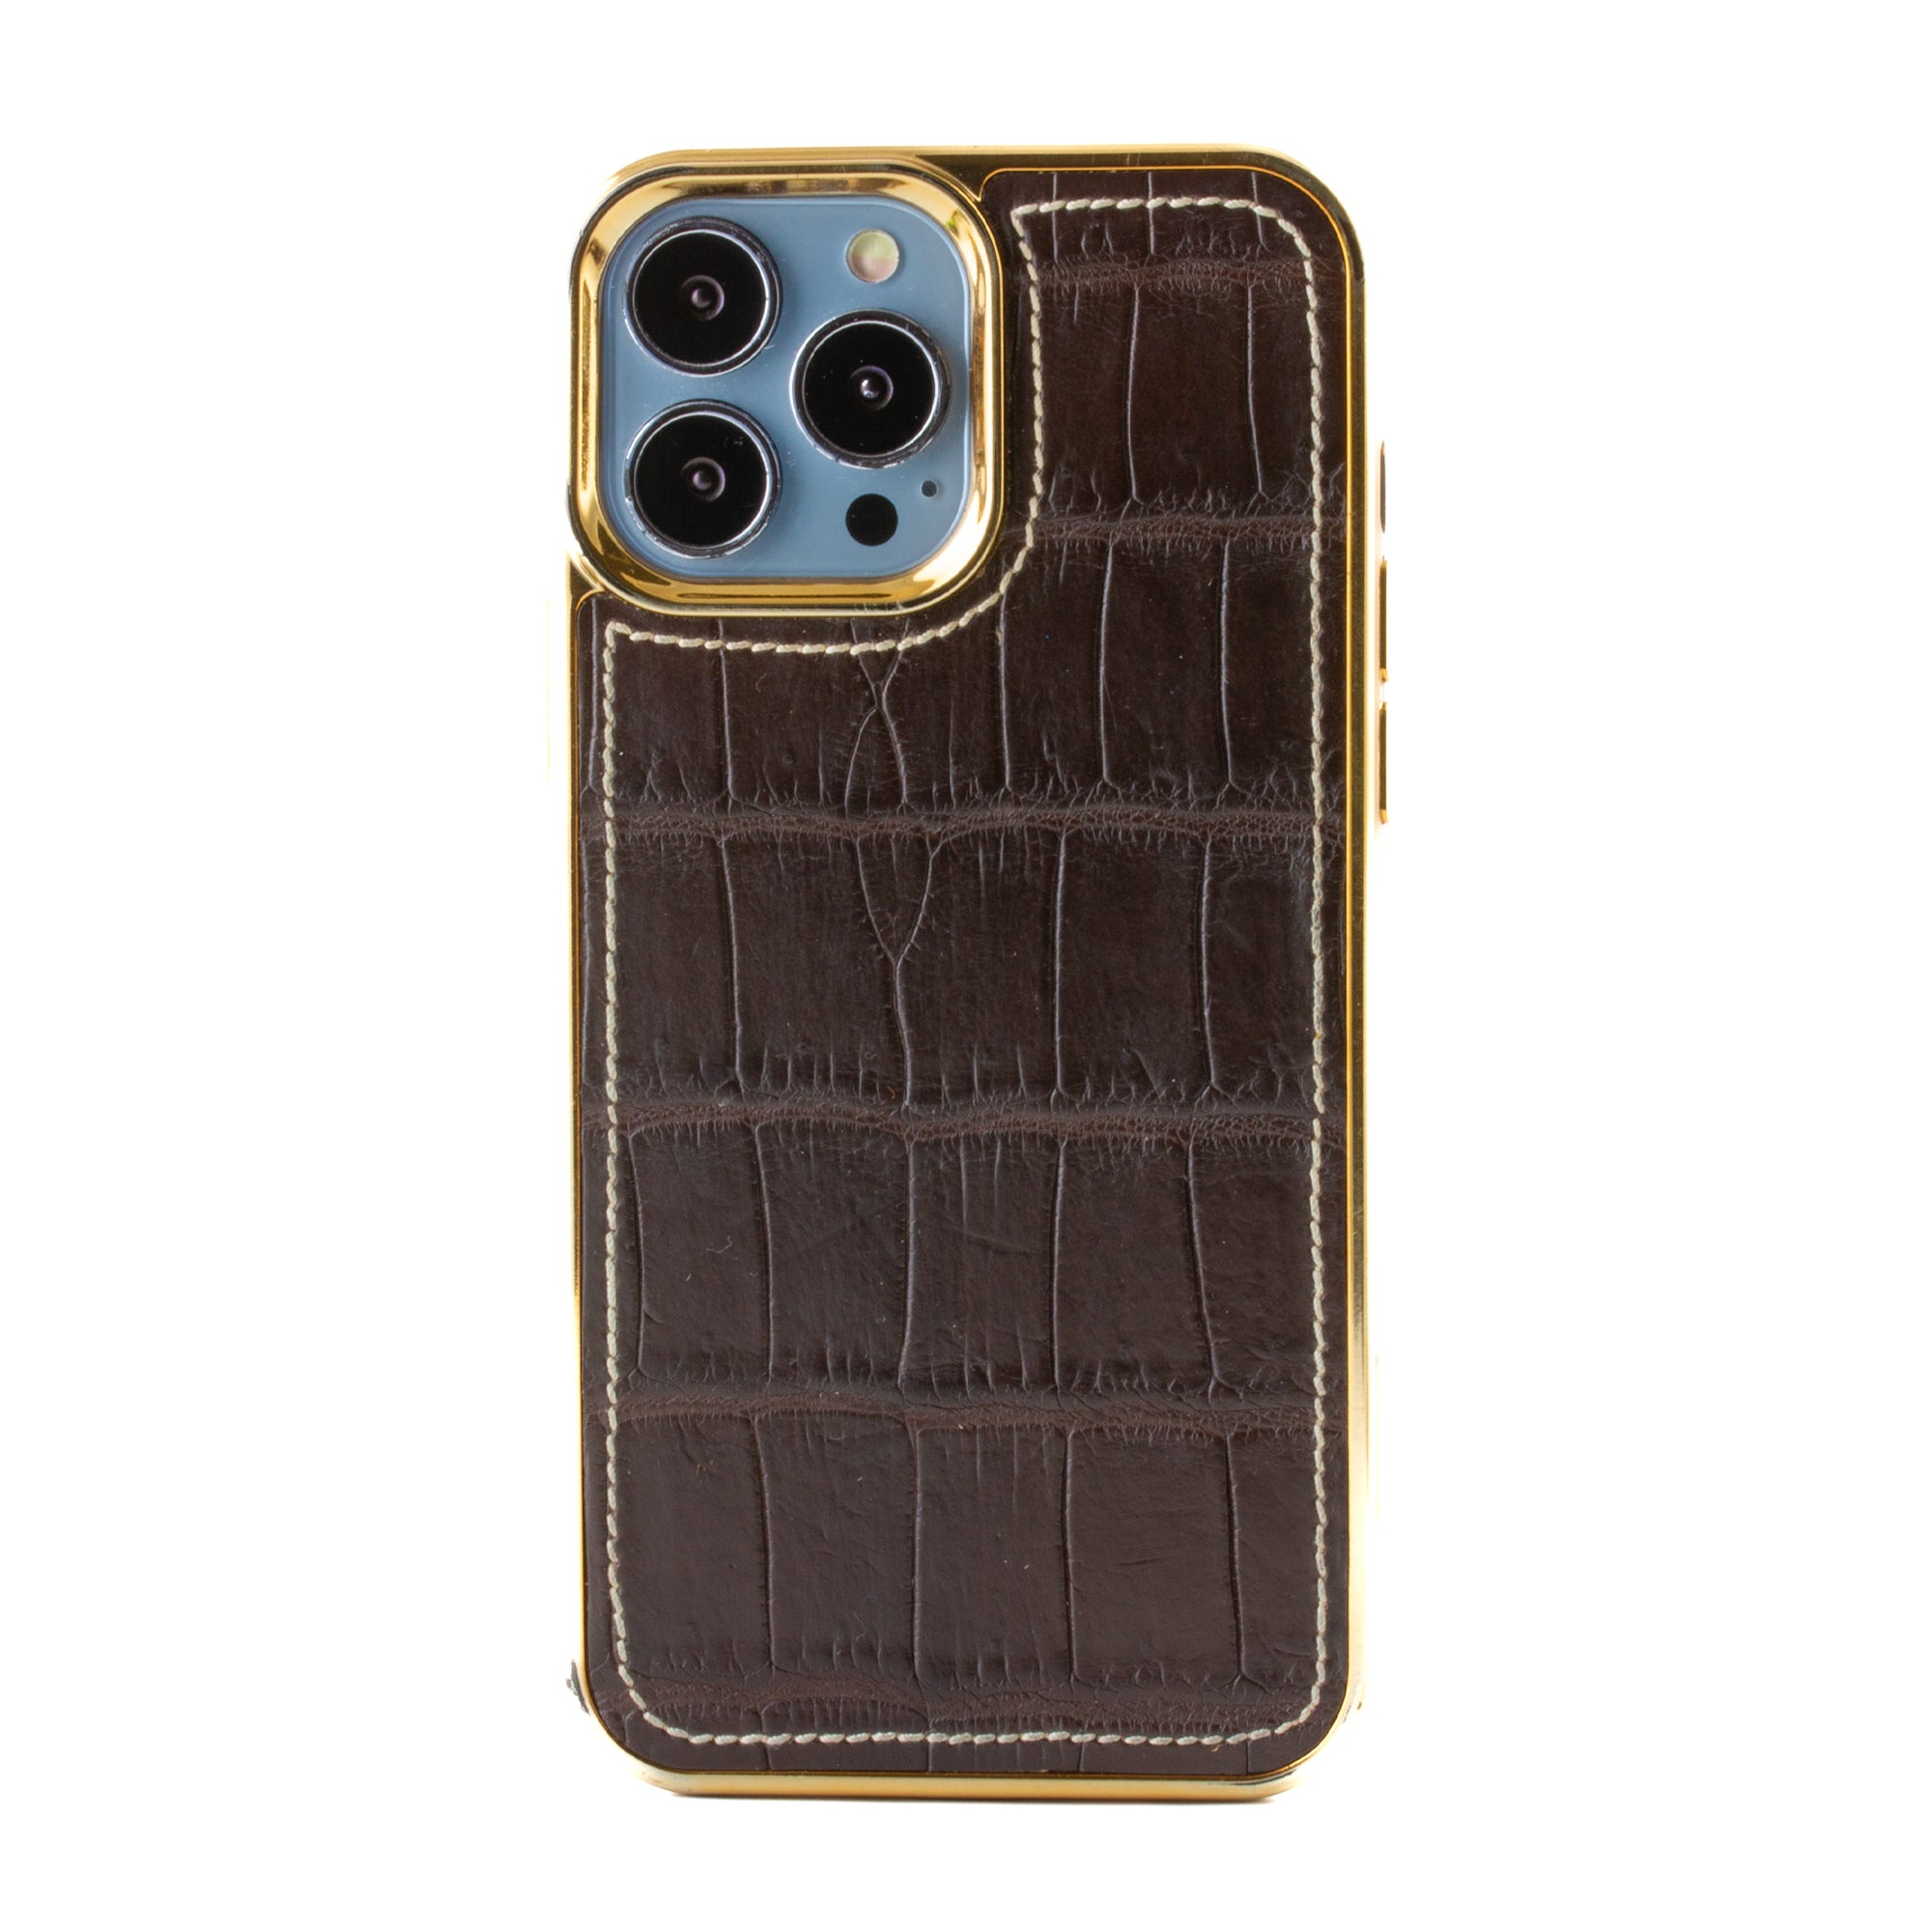 Clearance Sale - Leather iPhone "Sport Case" - iPhone 13 Pro Max - Brown alligator 2